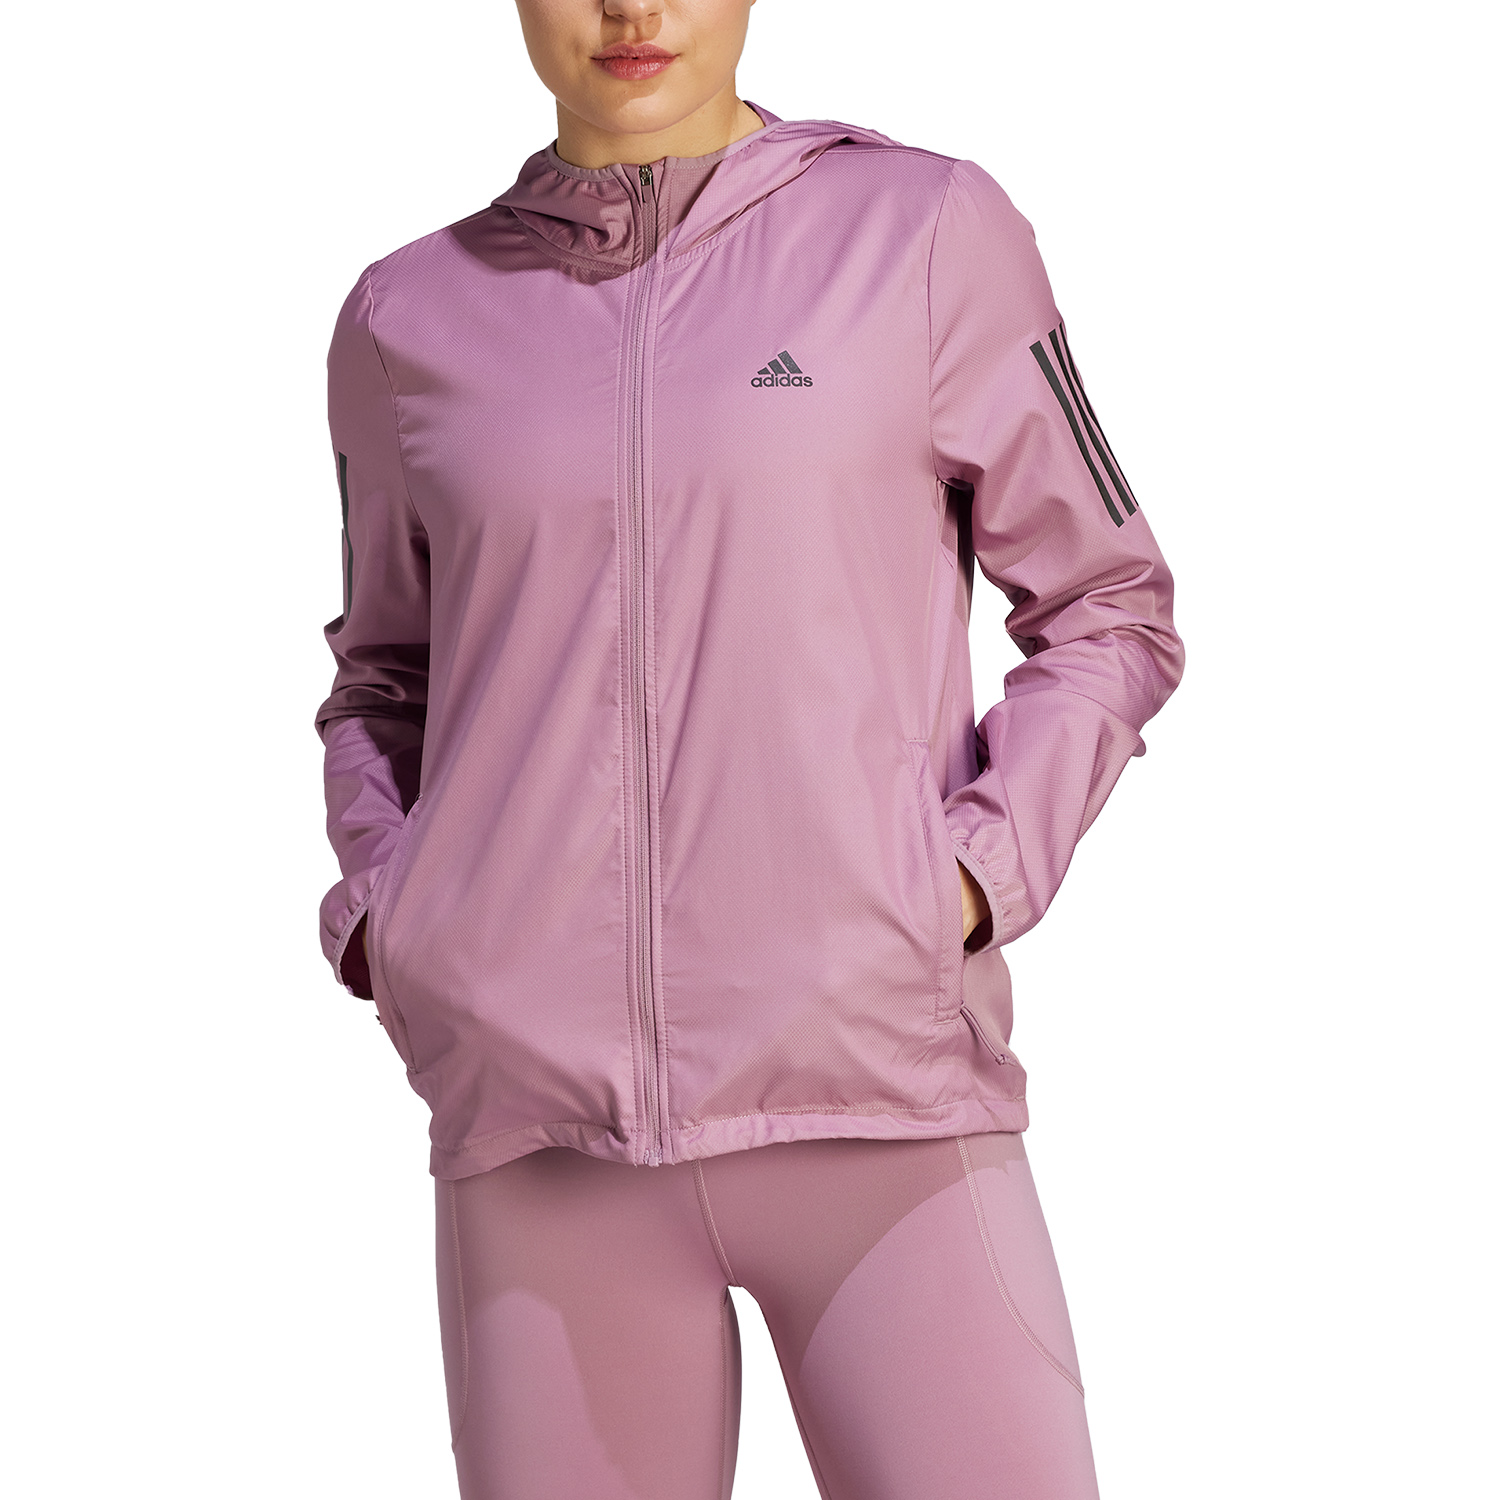 adidas Own The Run Windbreaker Giacca - Wonder Orchid